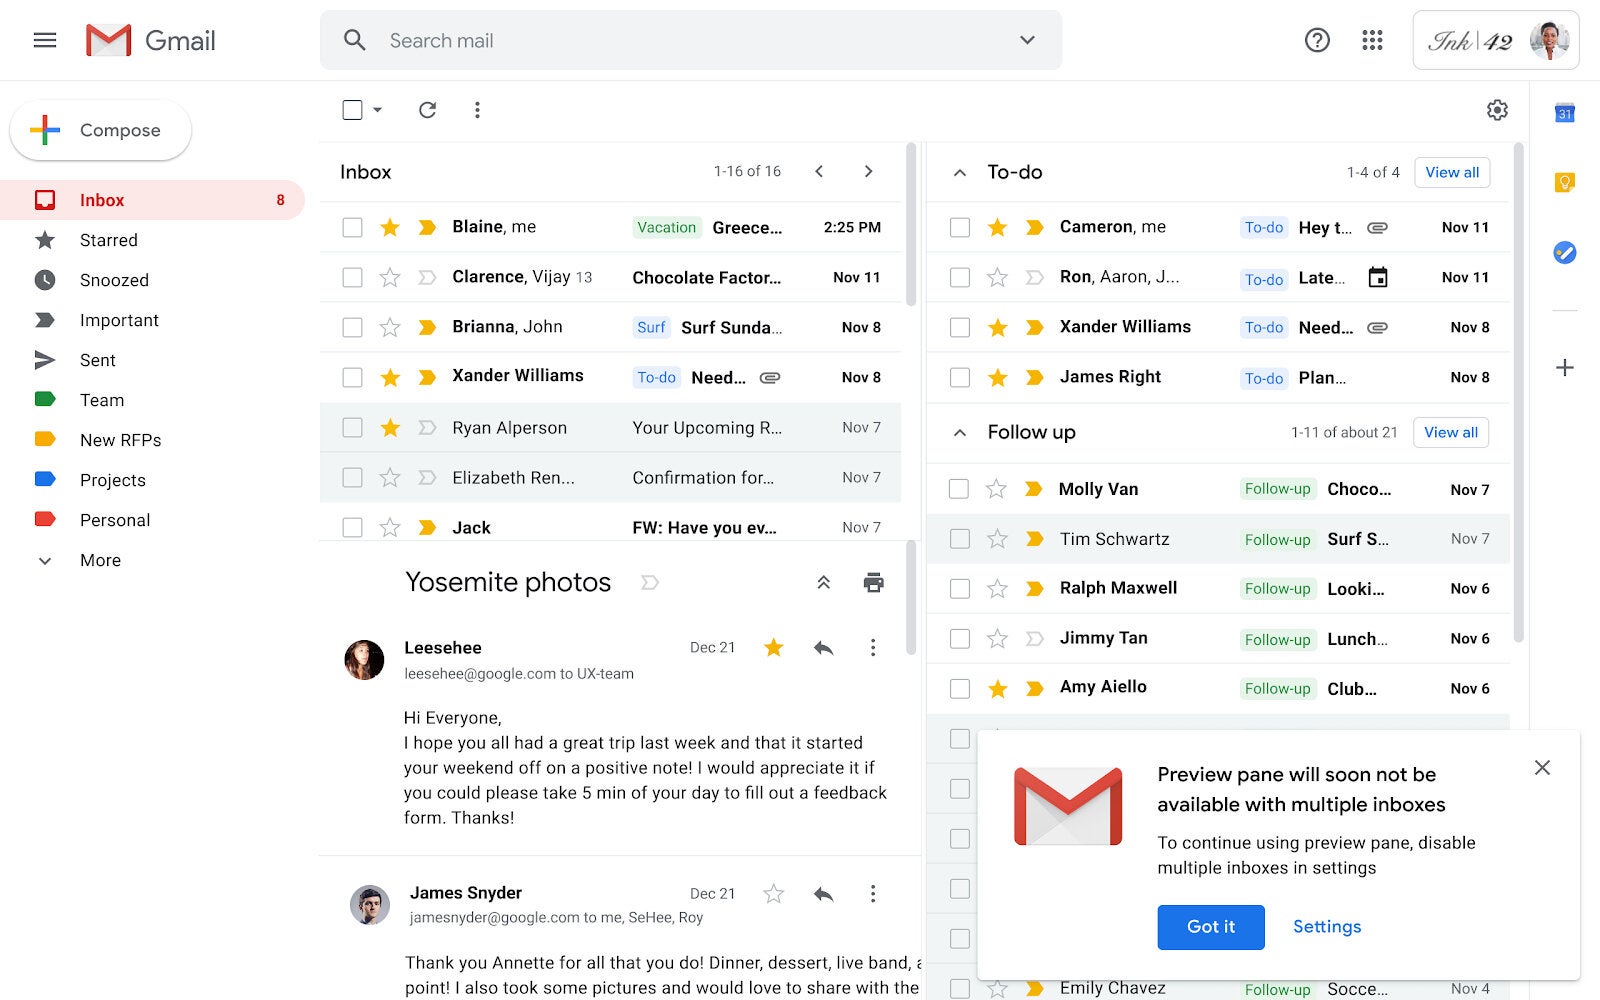 Notification banner in Gmail - Google is making important changes to Gmail starting February 20